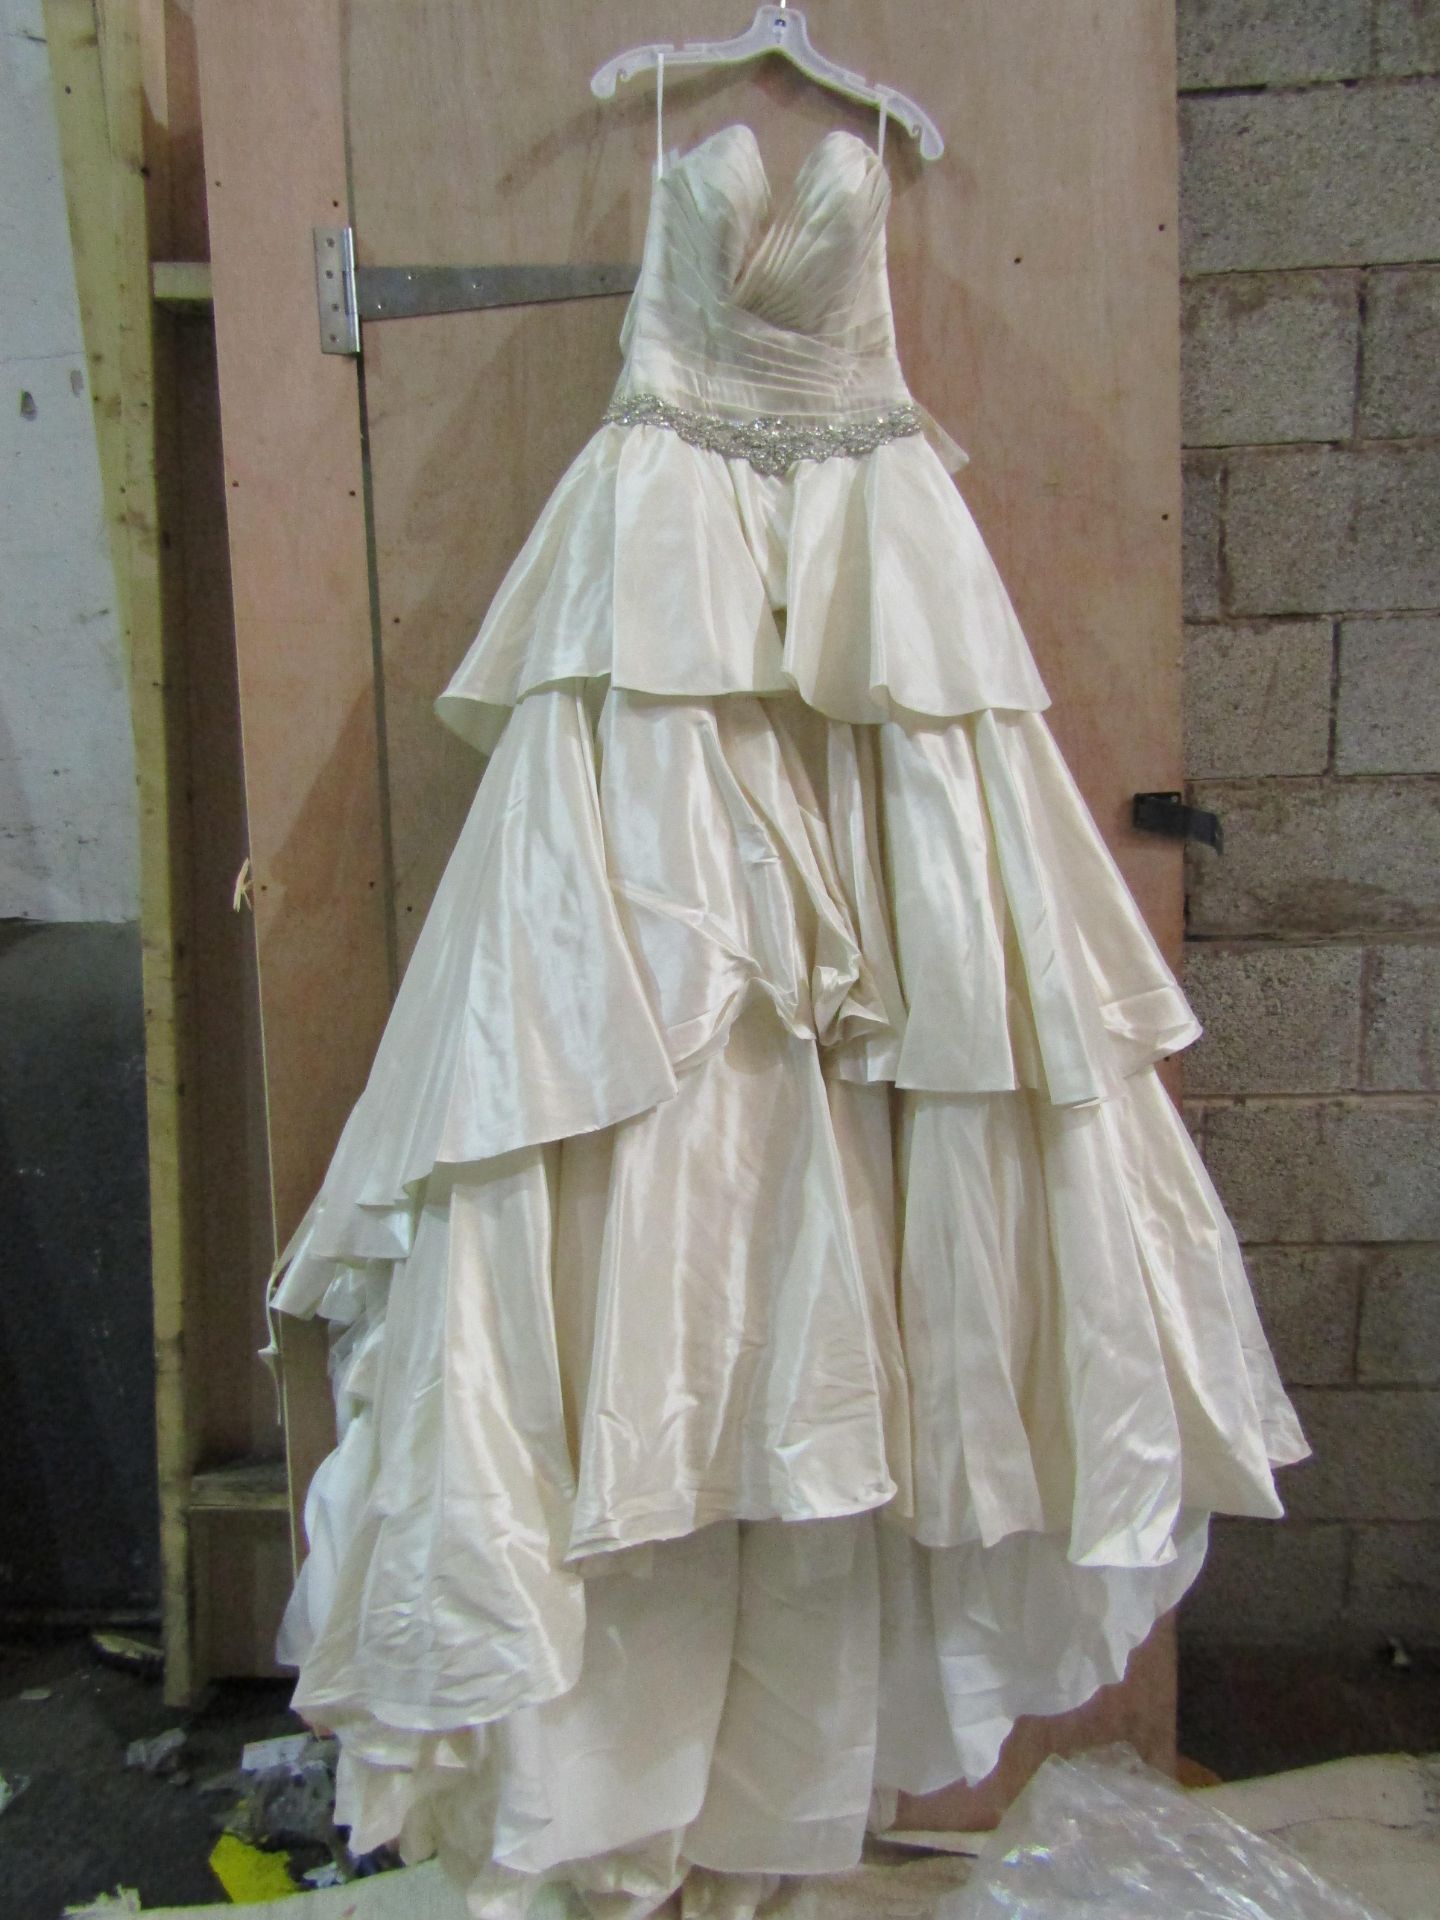 Approx 500 pieces of wedding shop stock to include wedding dresses, mother of the bride, dresses, - Image 13 of 43